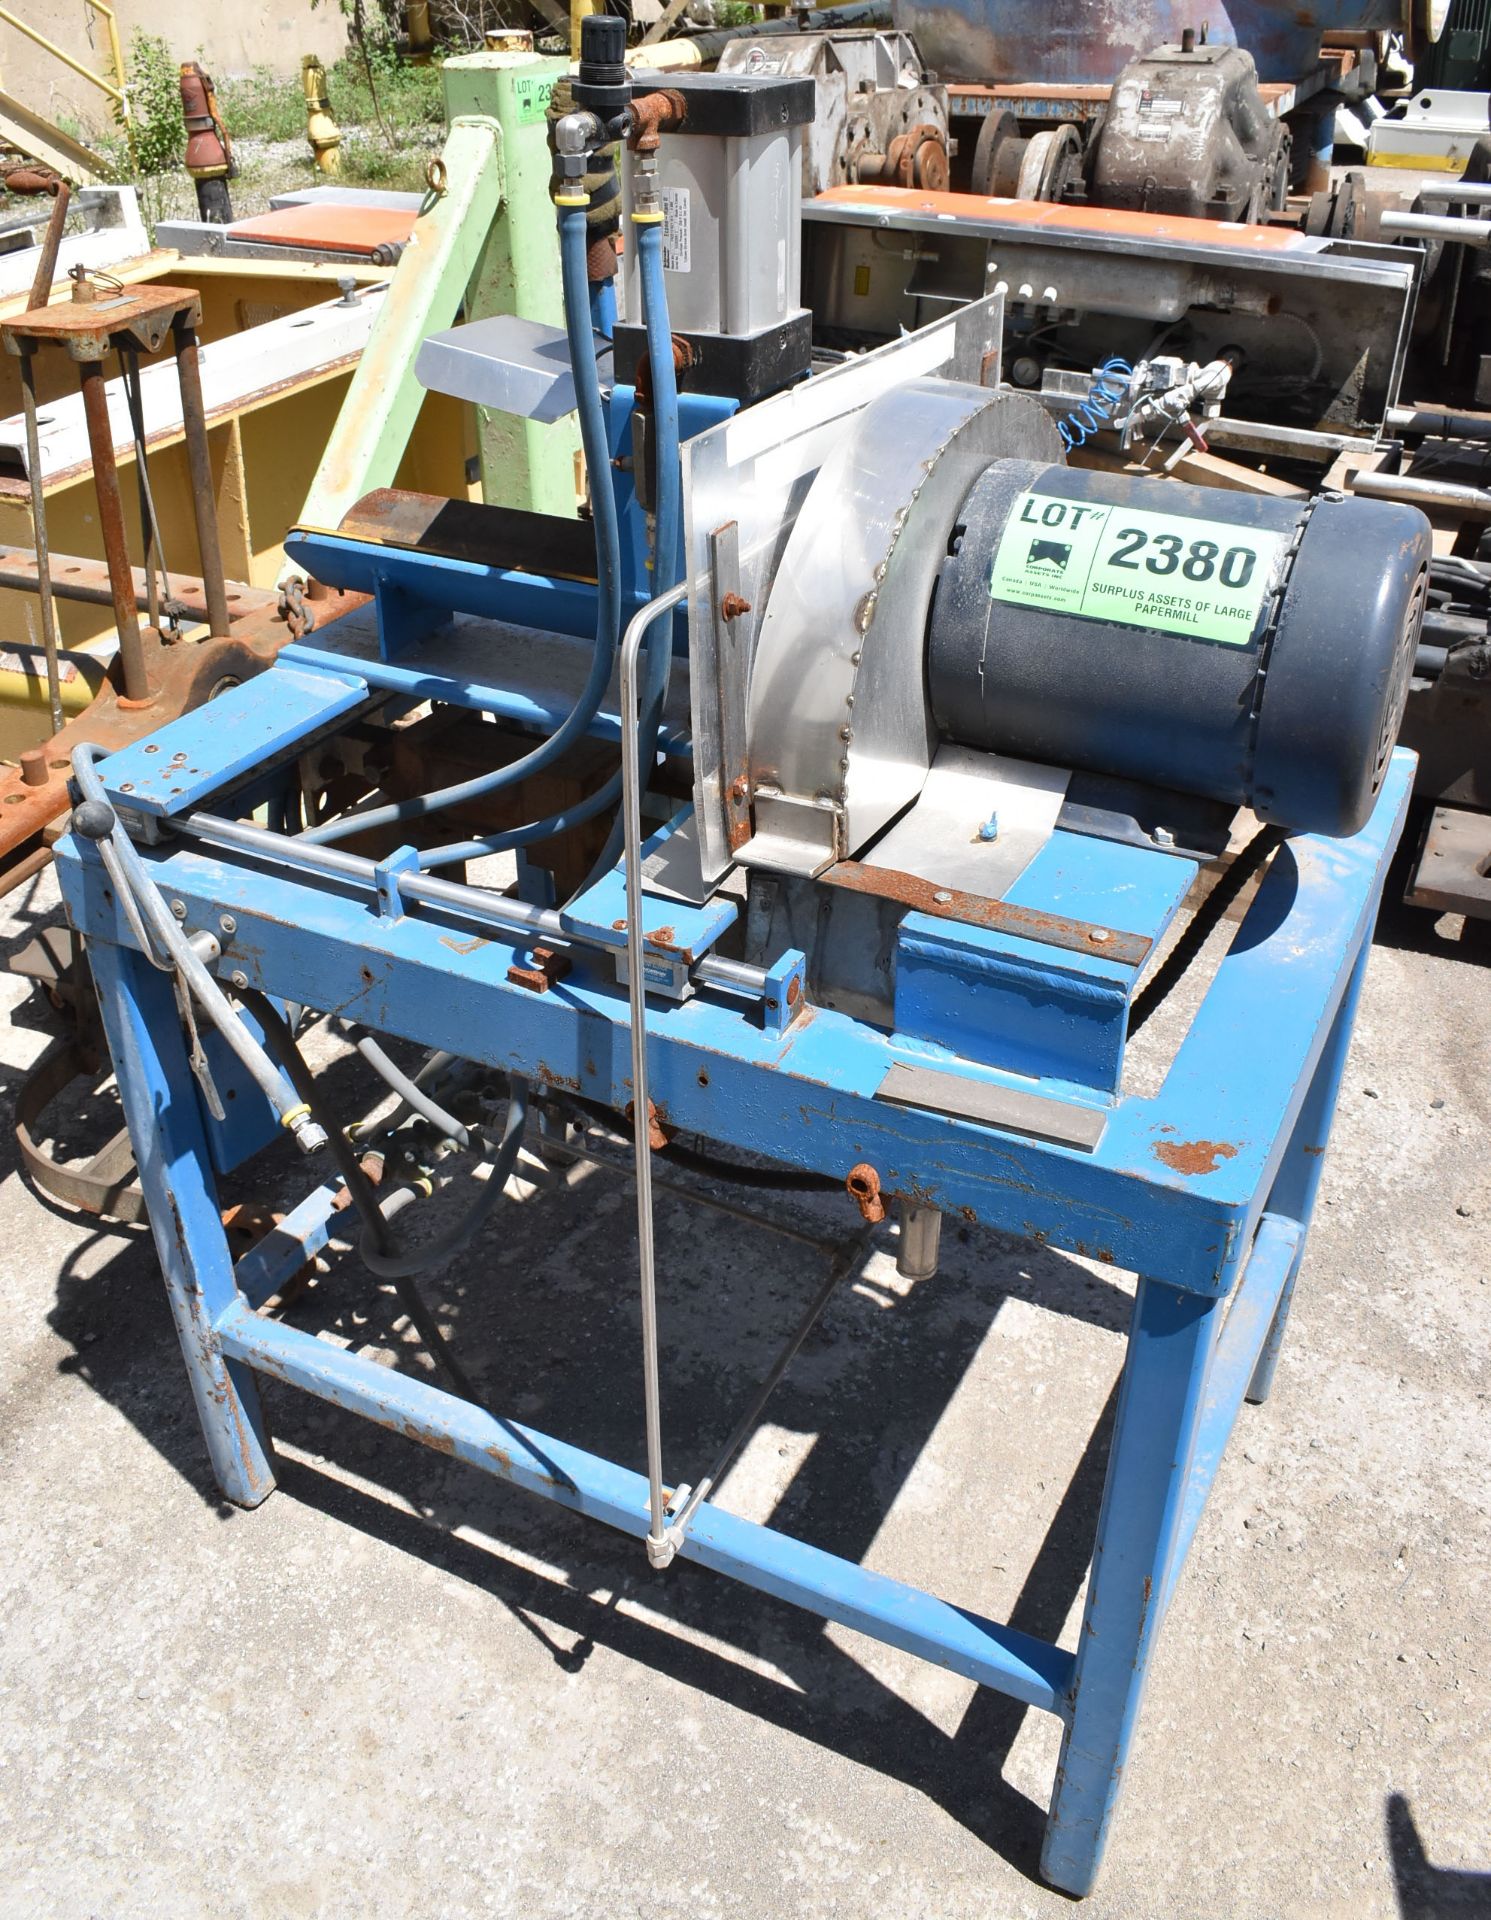 CUSTOM PIPE/CONDUIT CUTTING MACHINE WITH 5 HP MOTOR, S/N: N/A (CI) [RIGGING FEE FOR LOT #2380 - $